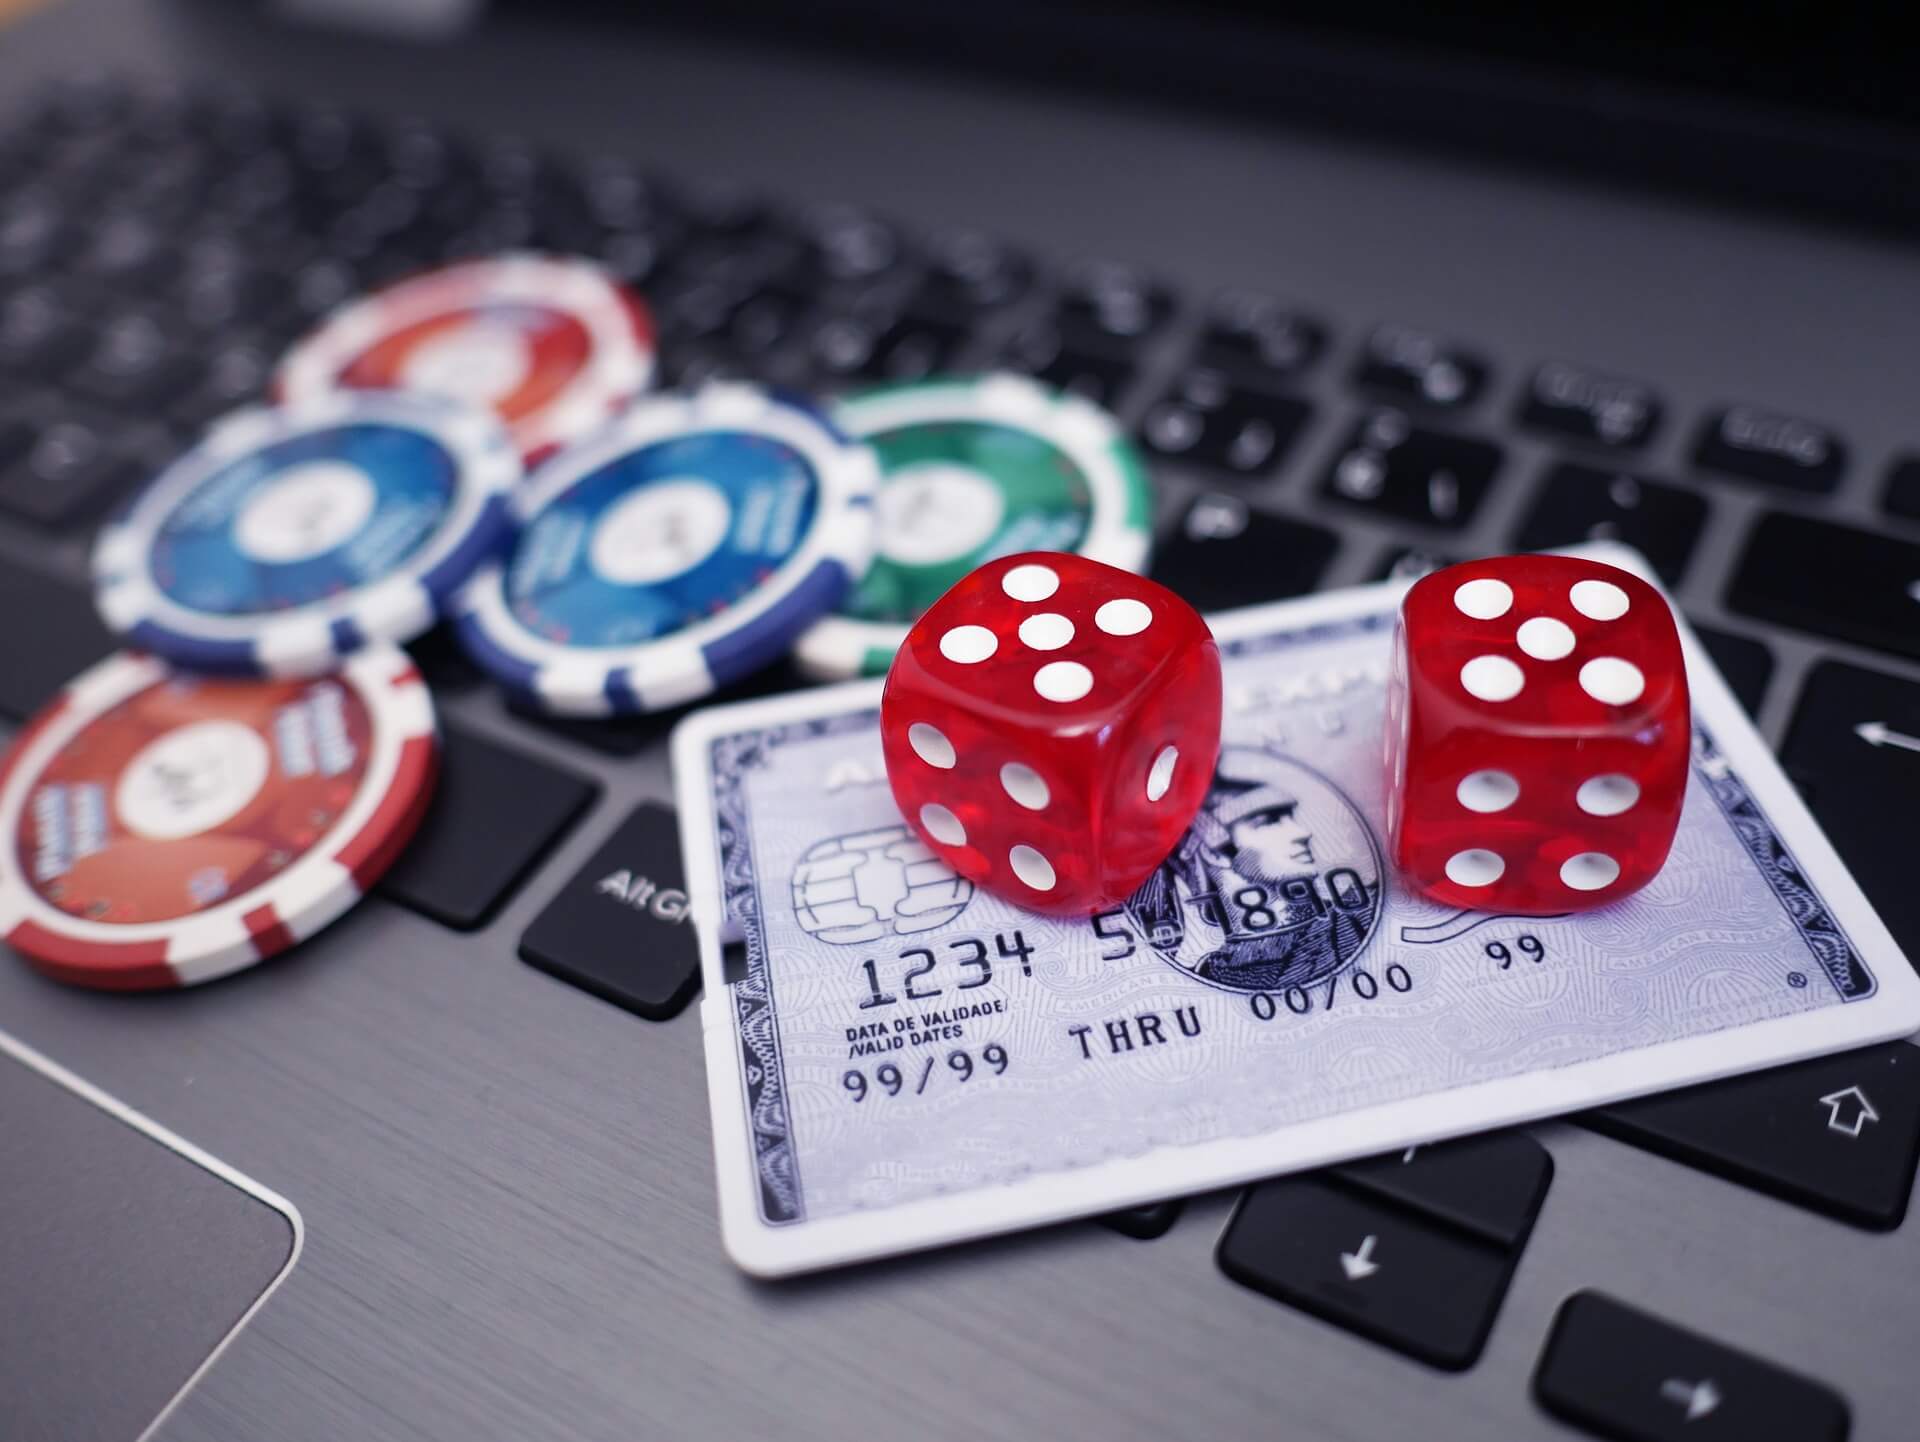 Trustly Casinos – What are They?